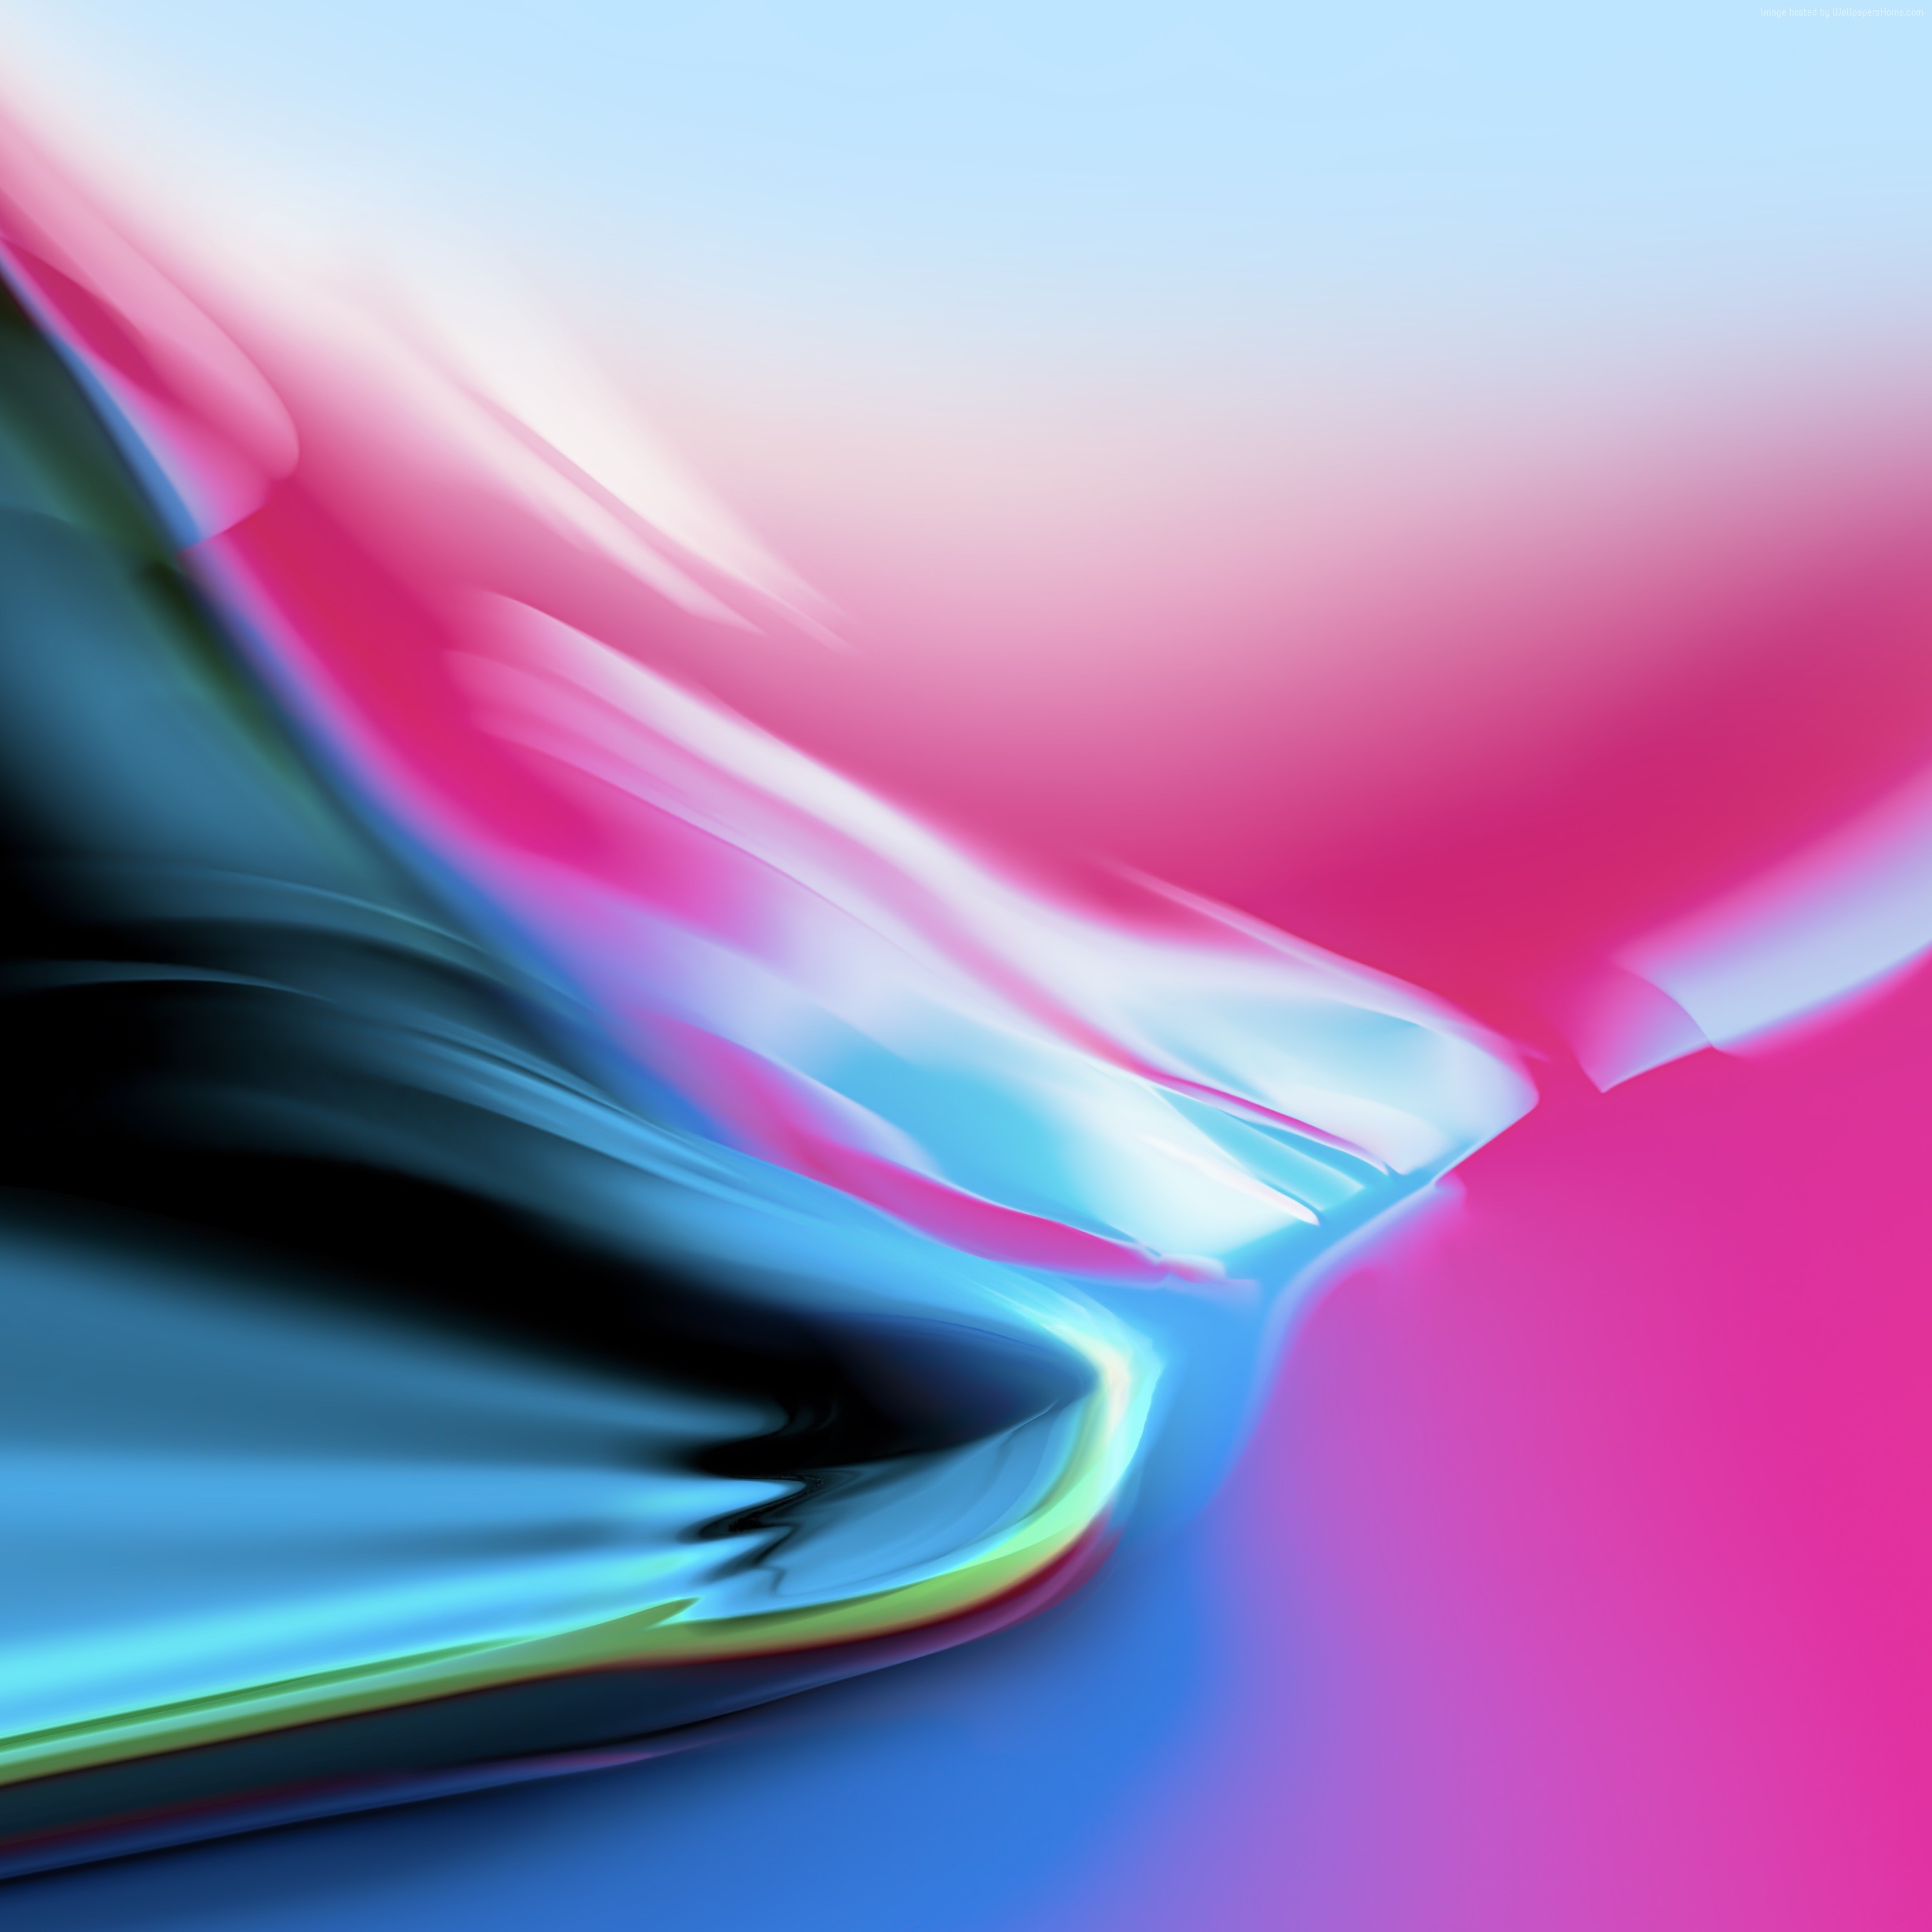 100822 HD colorful iPhone 8 iOS 11 iPhone X wallpaper